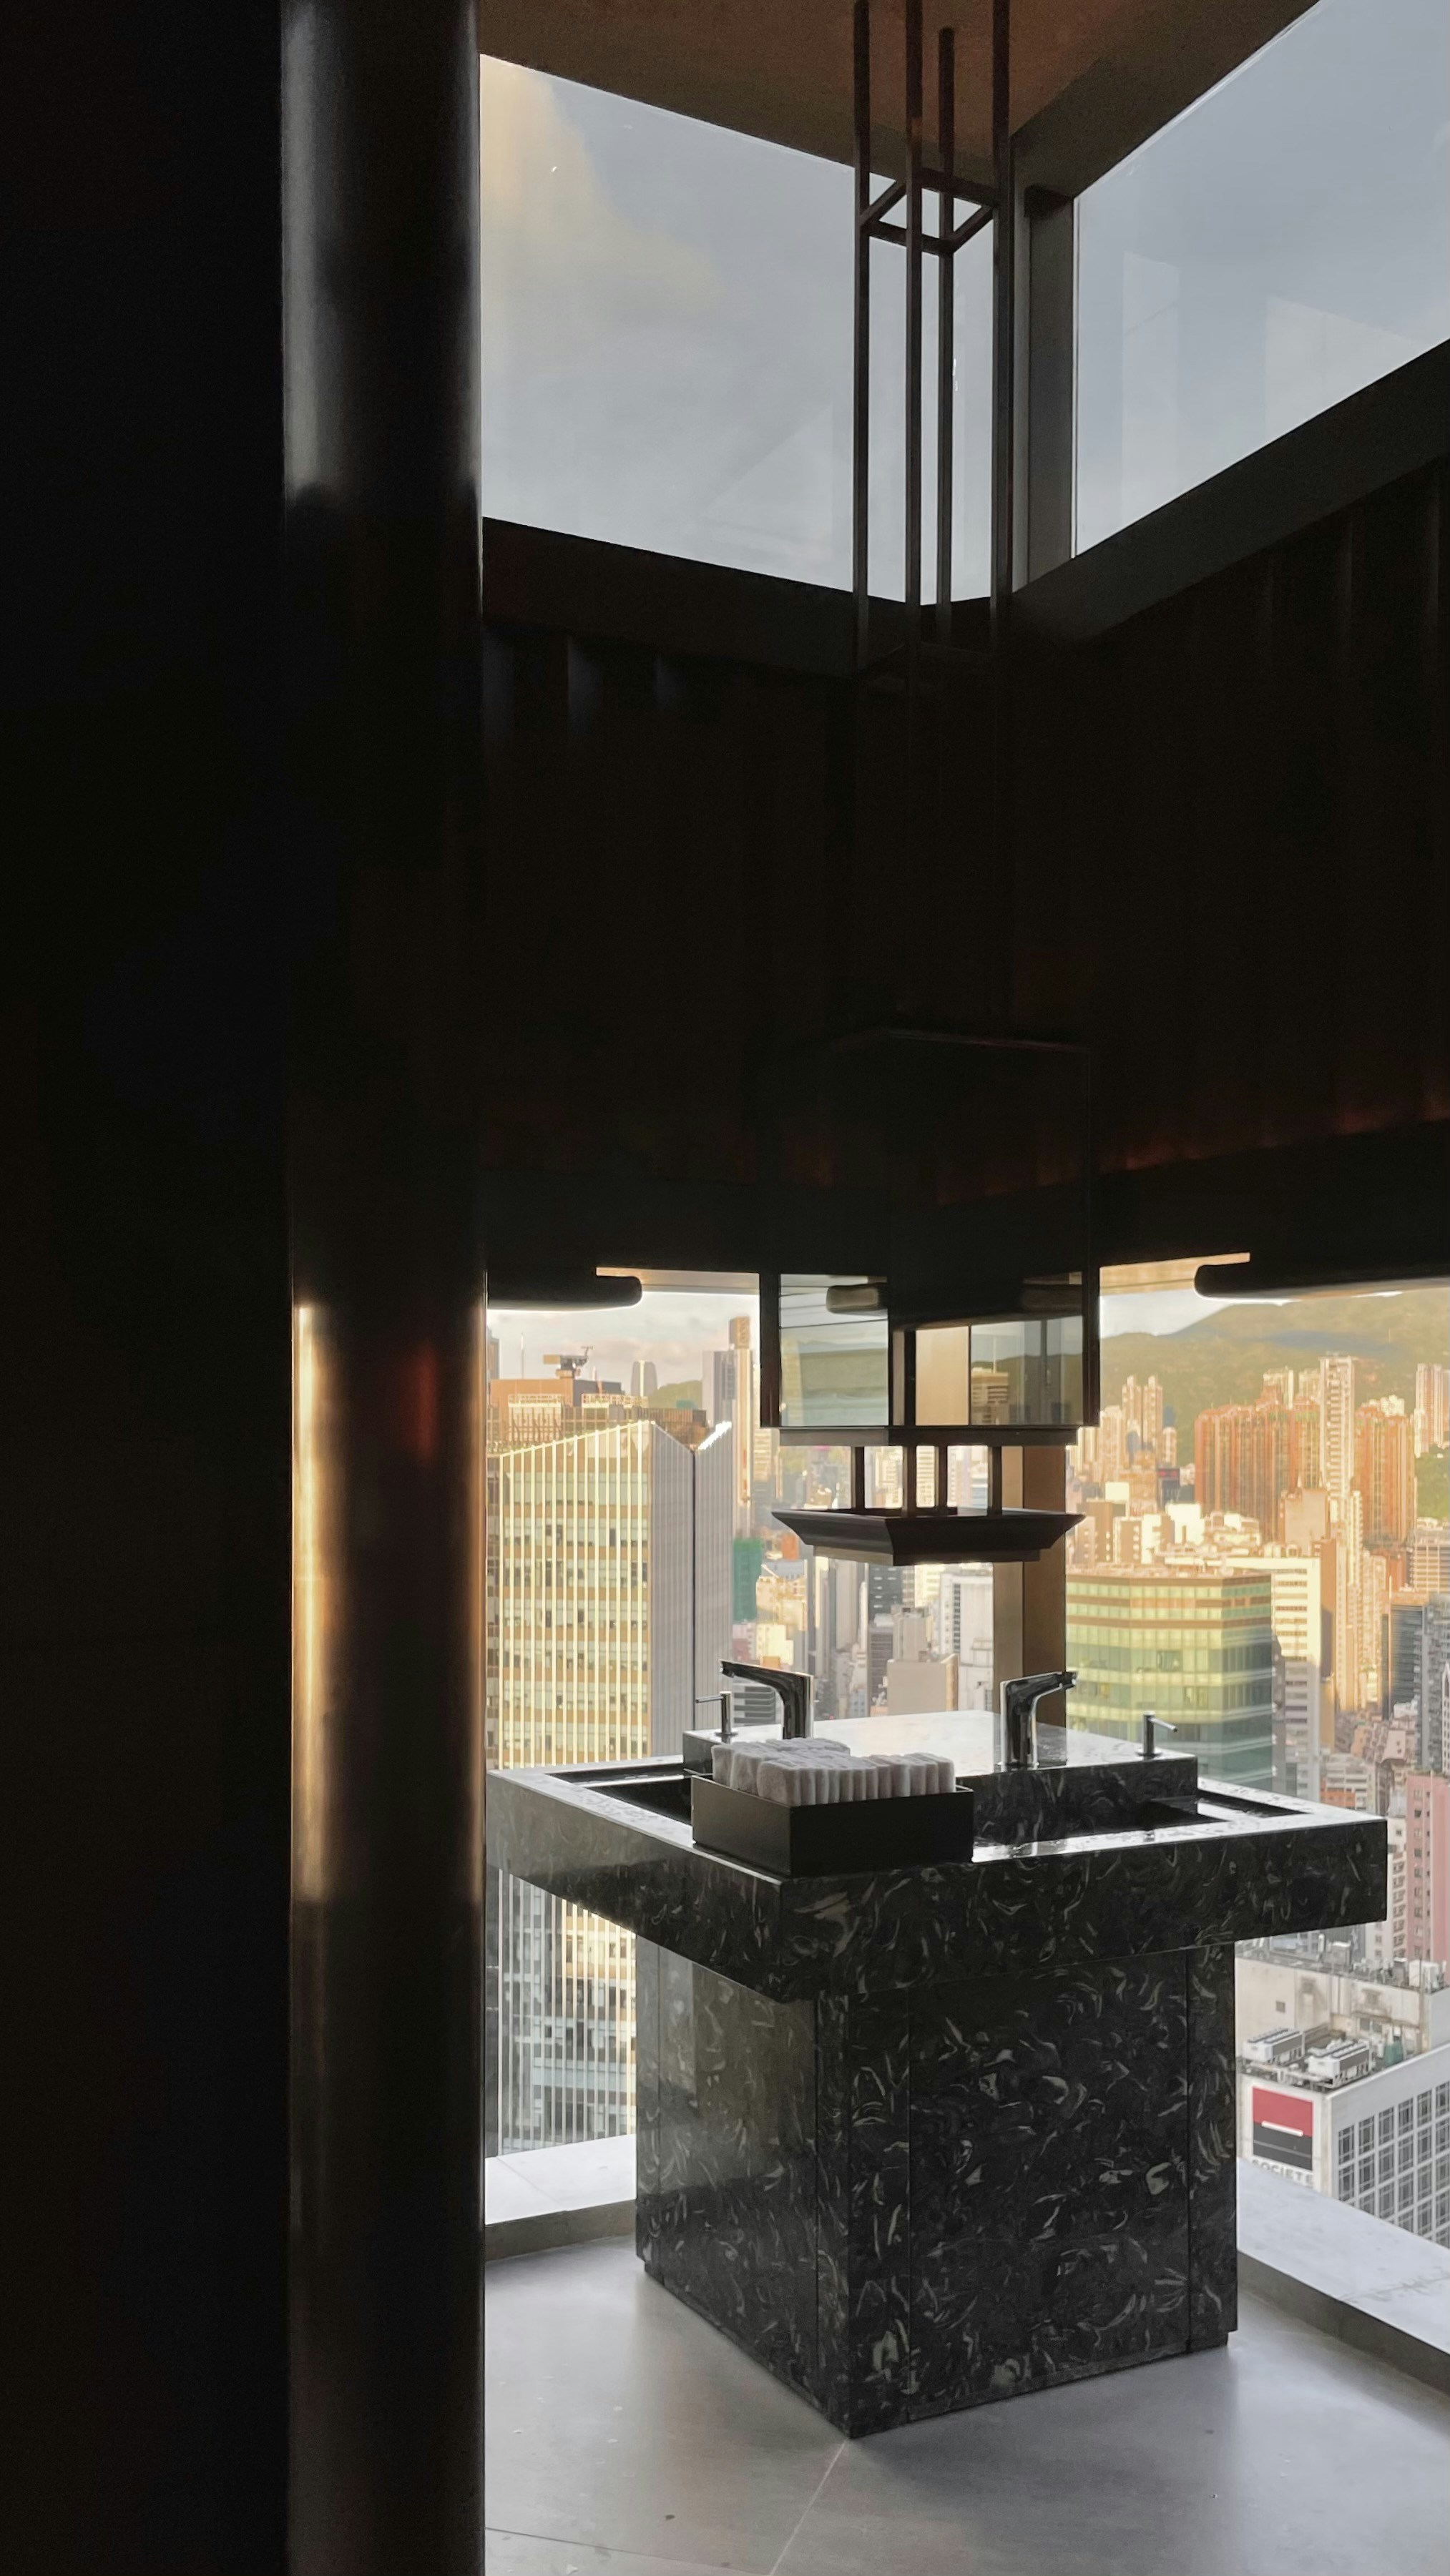 Beautifully designed bathroom overlooking the city during the golden hour.